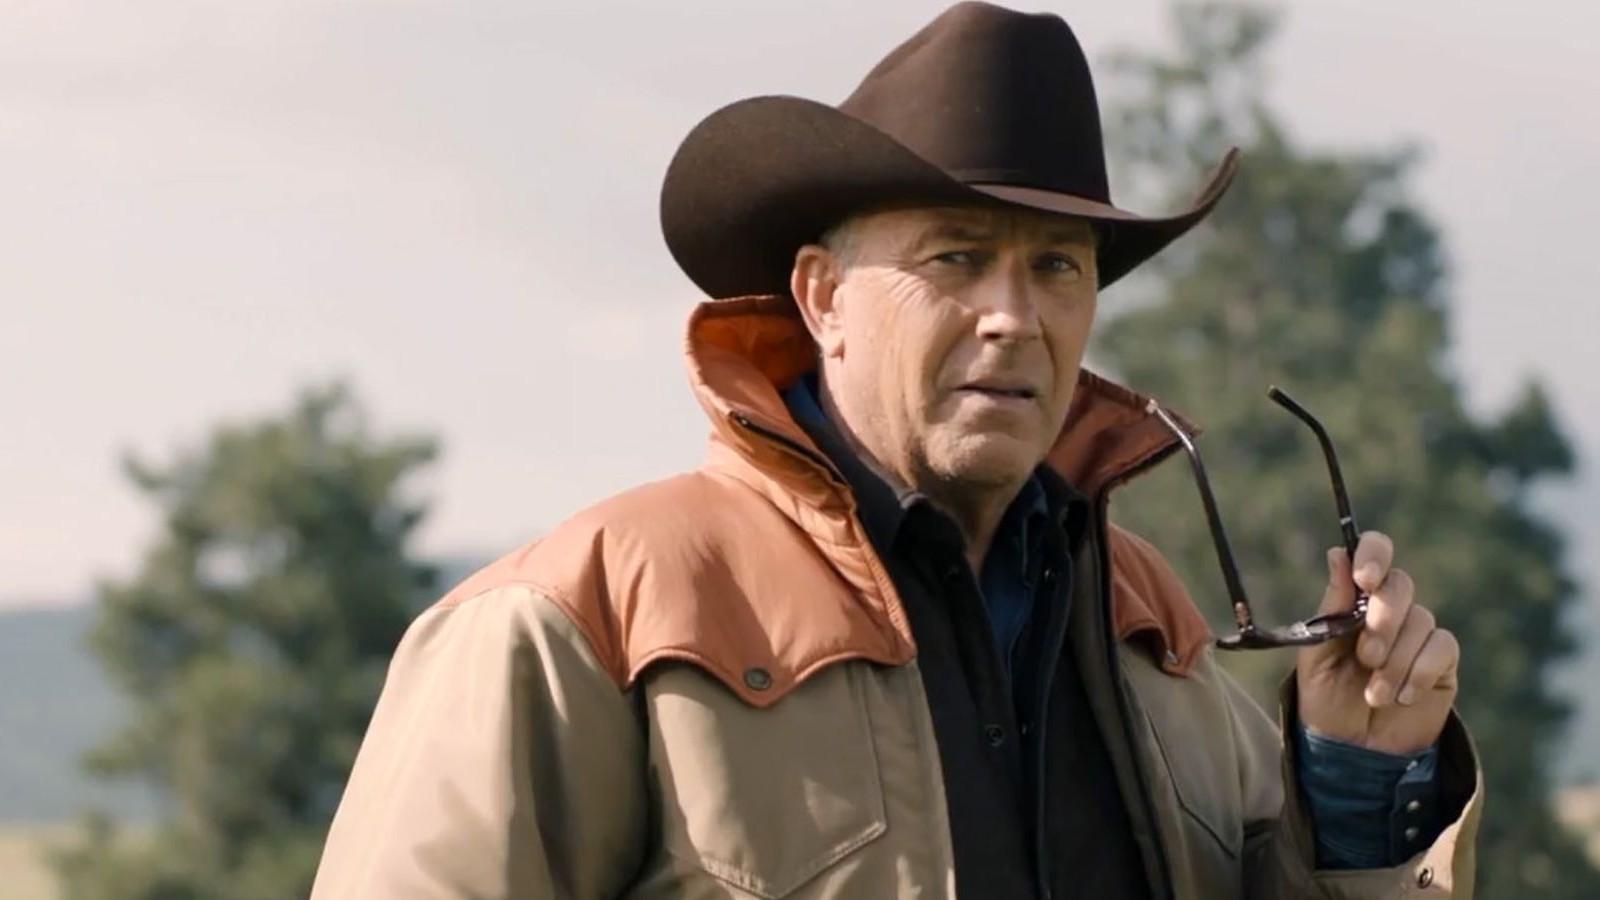 Kevin Costner as John Dutton in Yellowstone, looking into the distance